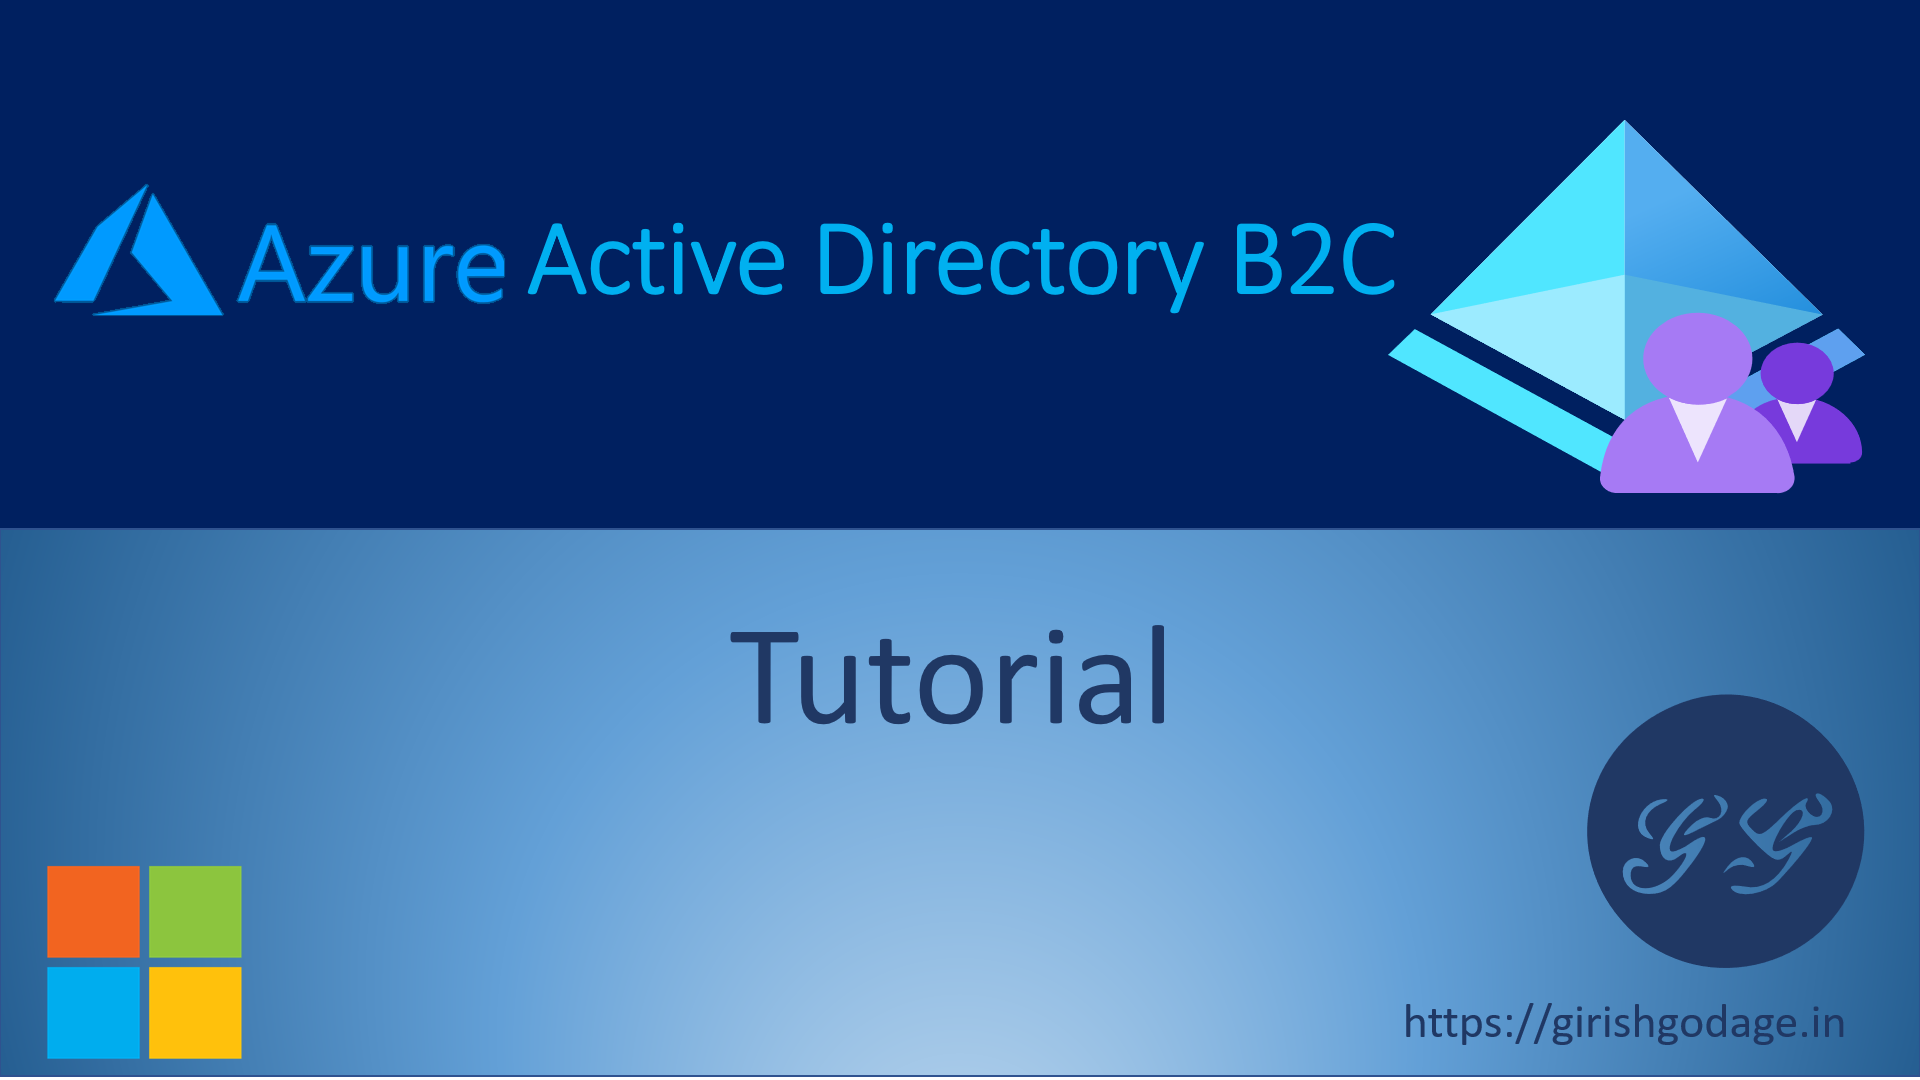 Register a web application in Azure Active Directory B2C